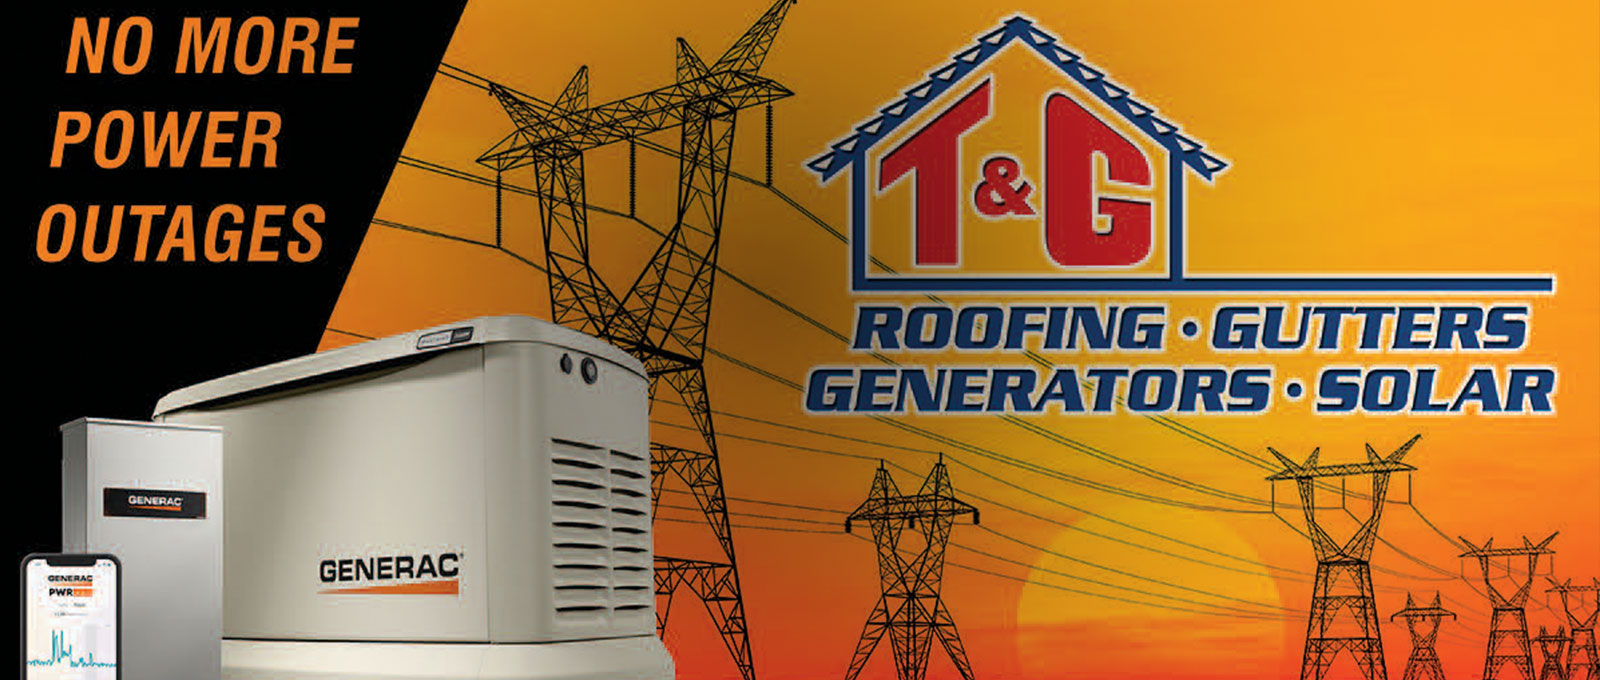 Get Home Backup Power with T&G Roofing and Solar Company